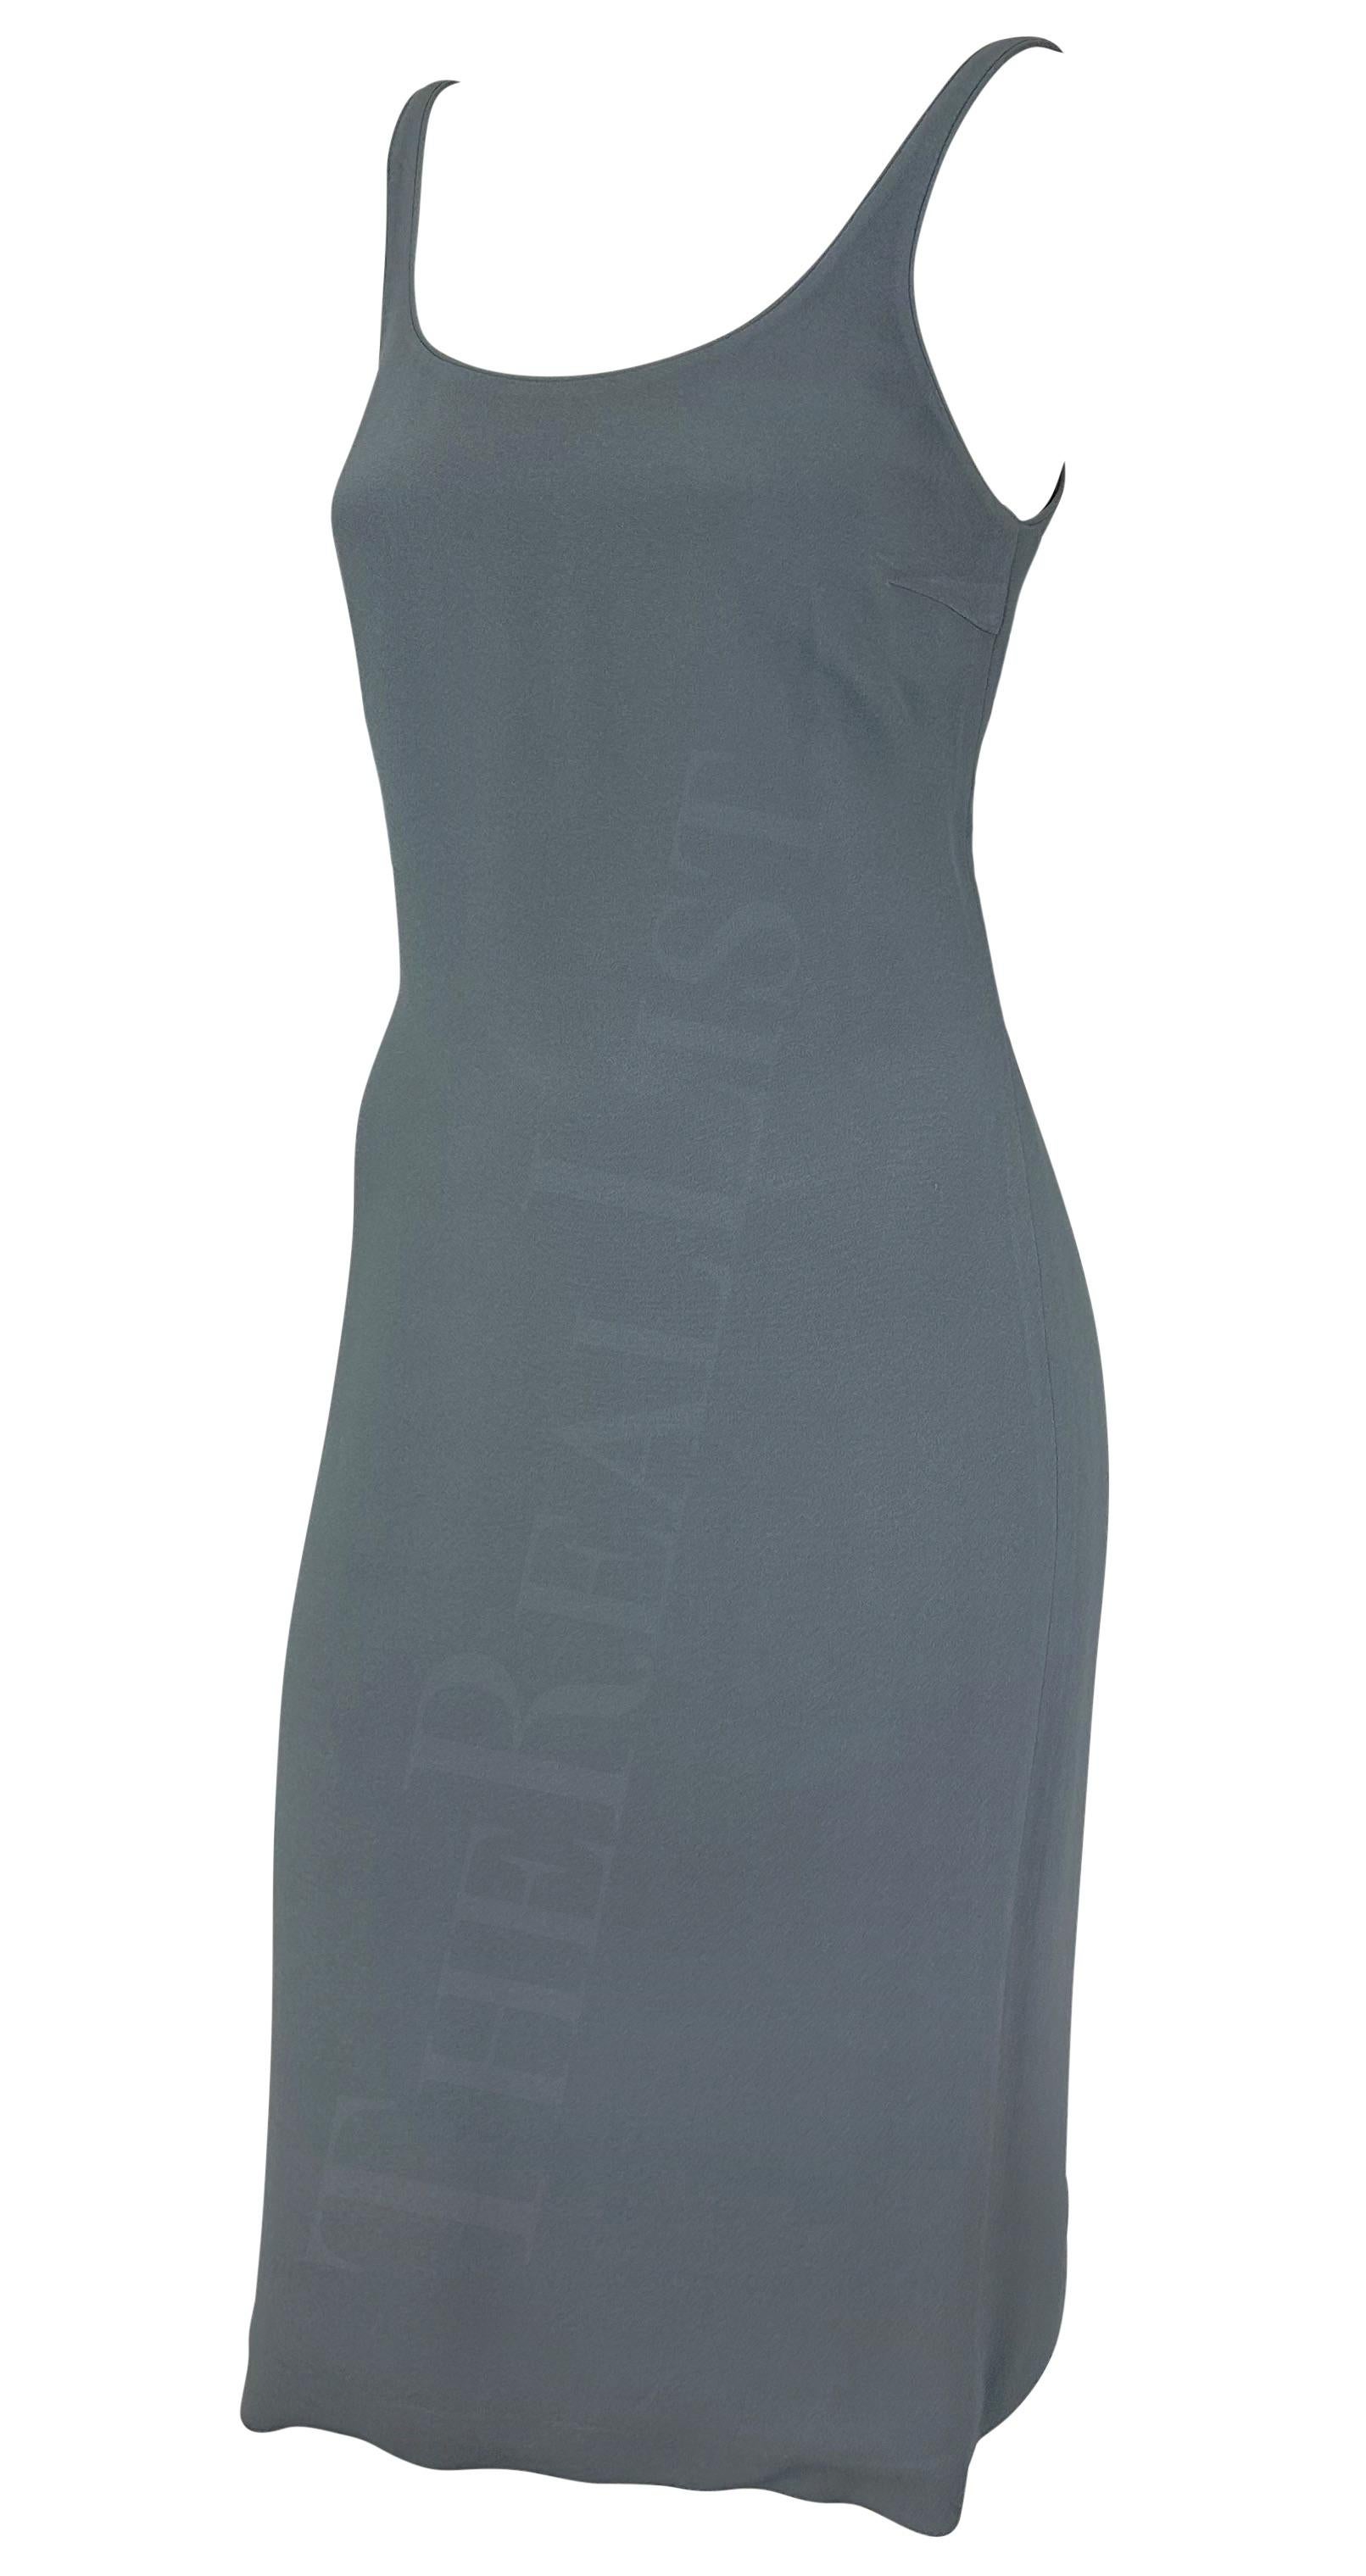 TheRealList presents: a grey Giorgio Armani dress. From the 1990s, this midi-length dress features a wide scoop neckline and thin straps. Masterfully constructed and effortlessly chic, this vintage Giorgio Armani dress is the perfect closet staple.